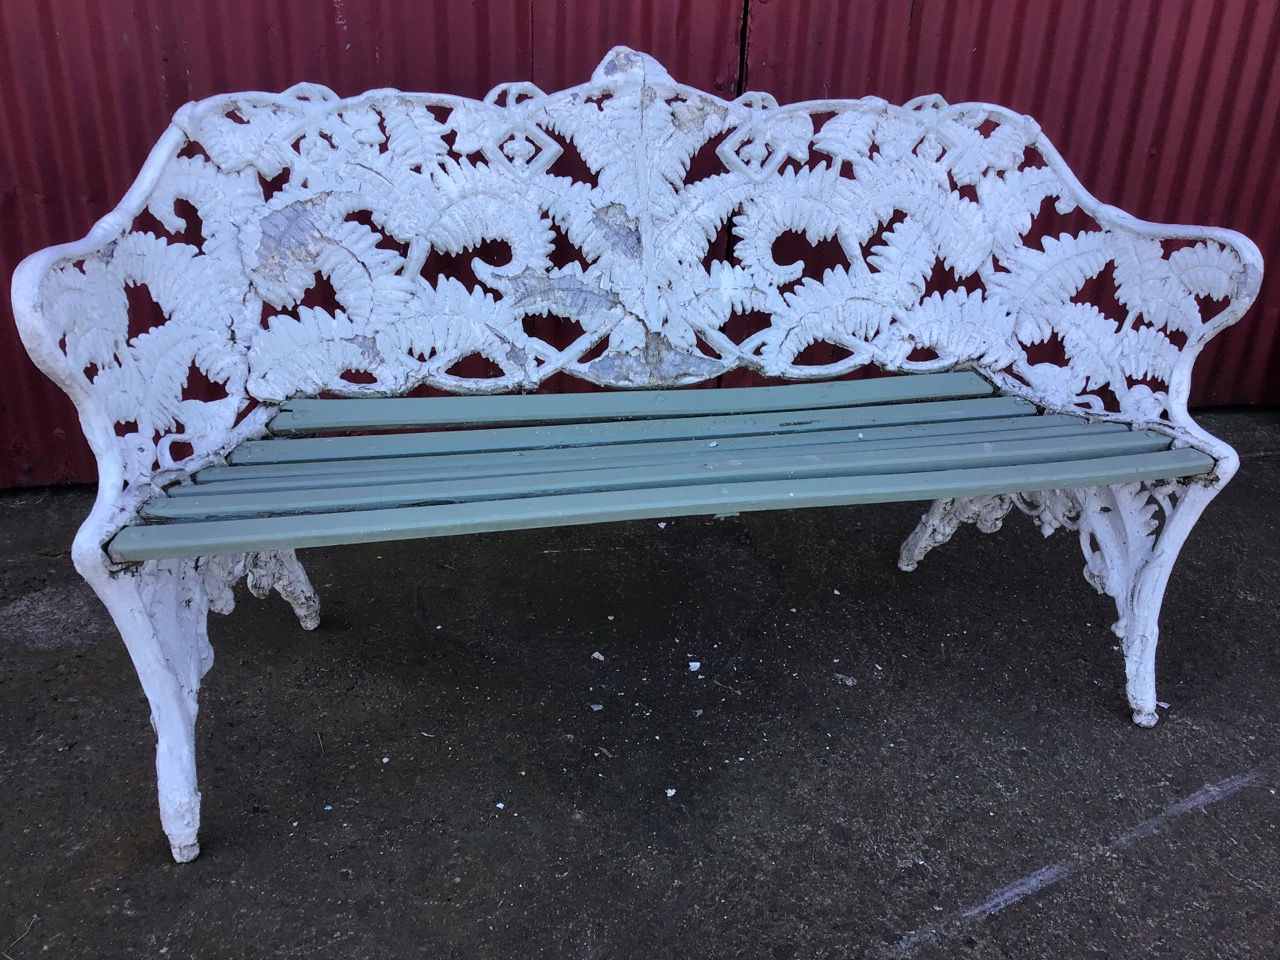 A Coalbrookdale style garden bench, in the fern and blackberry pattern, with wood slatted seat. (